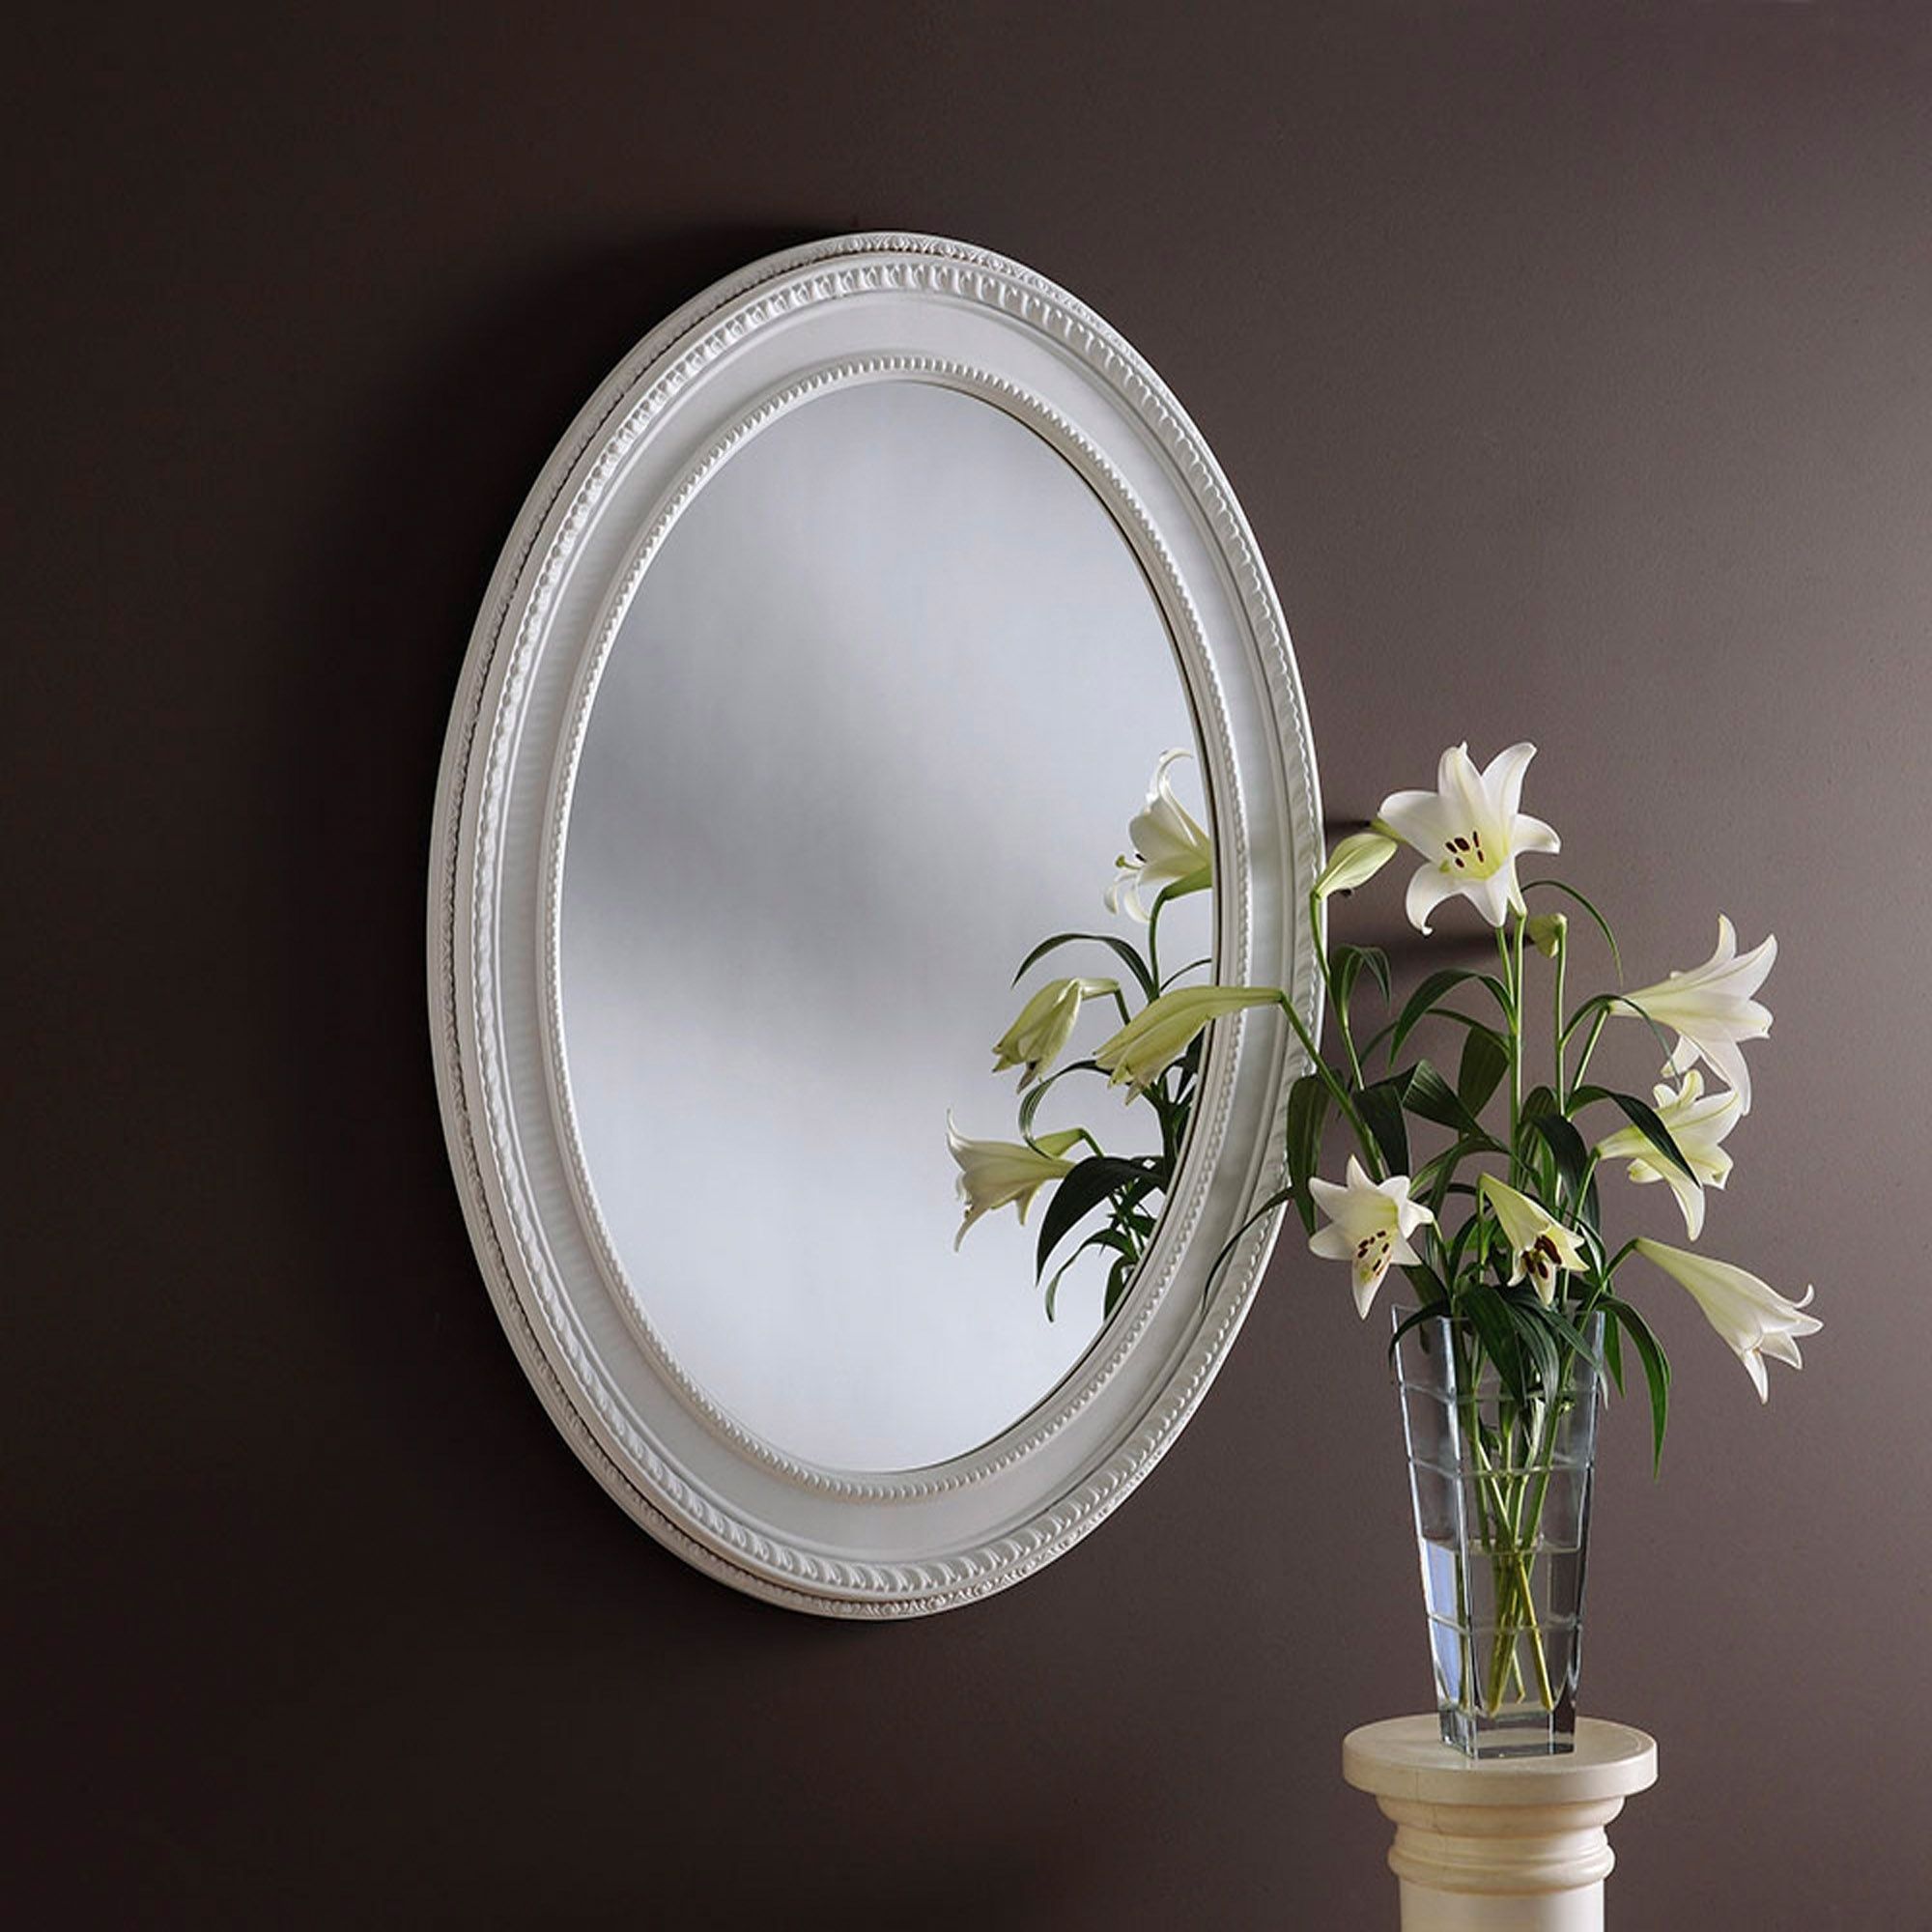 Large Oval Contemporary Mirror | Wall Mirrors Intended For Scalloped Round Modern Oversized Wall Mirrors (View 13 of 15)